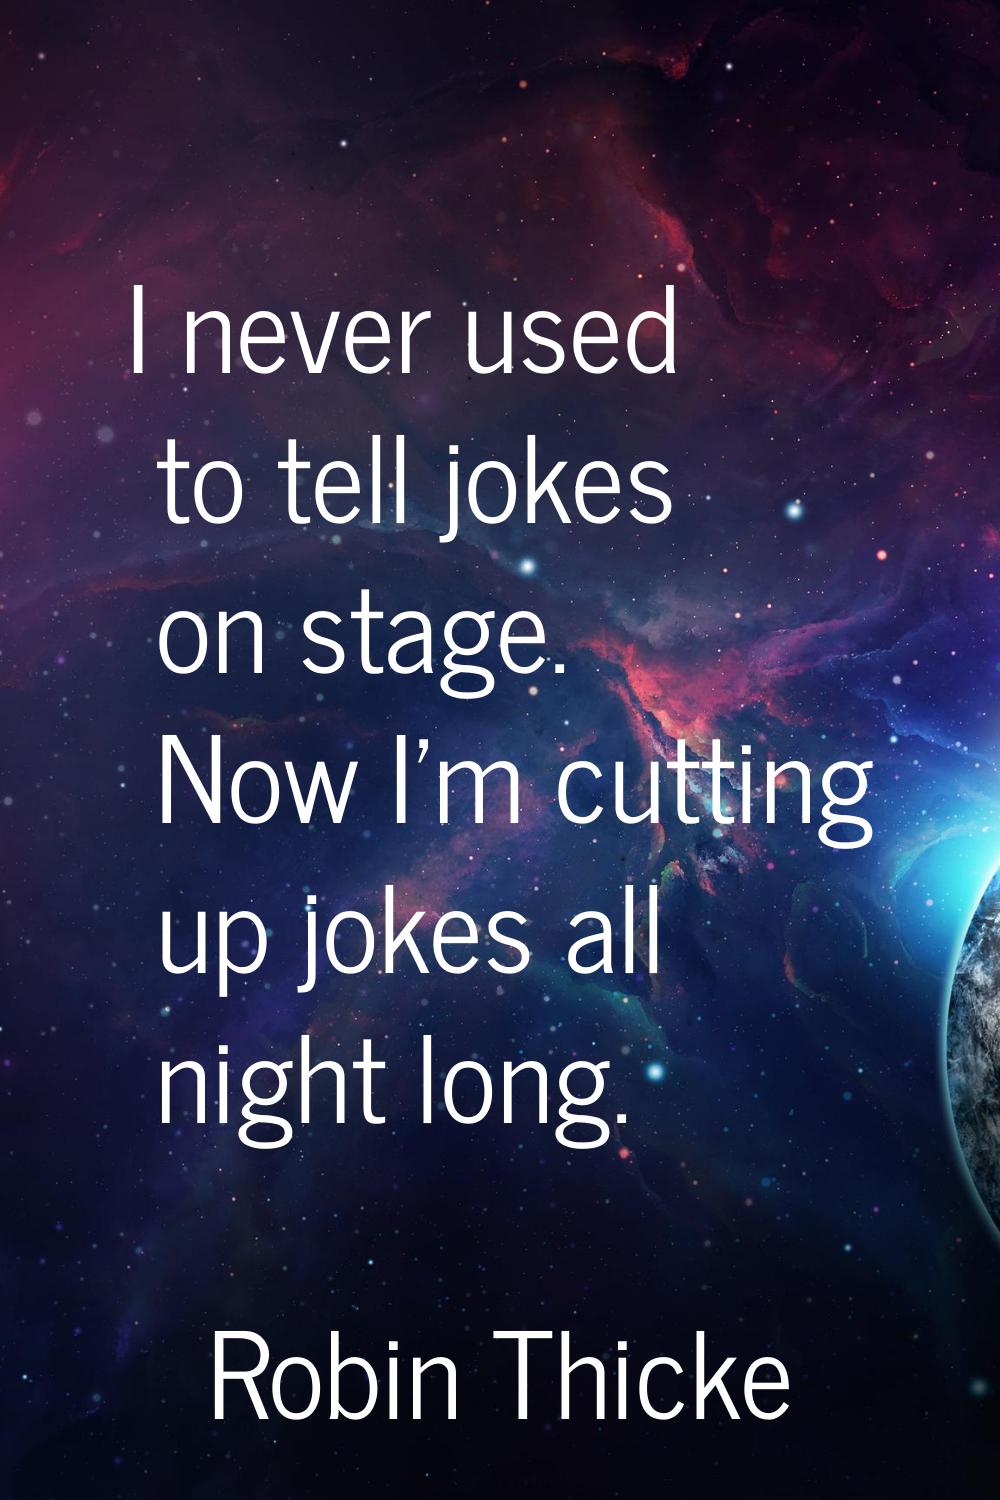 I never used to tell jokes on stage. Now I'm cutting up jokes all night long.